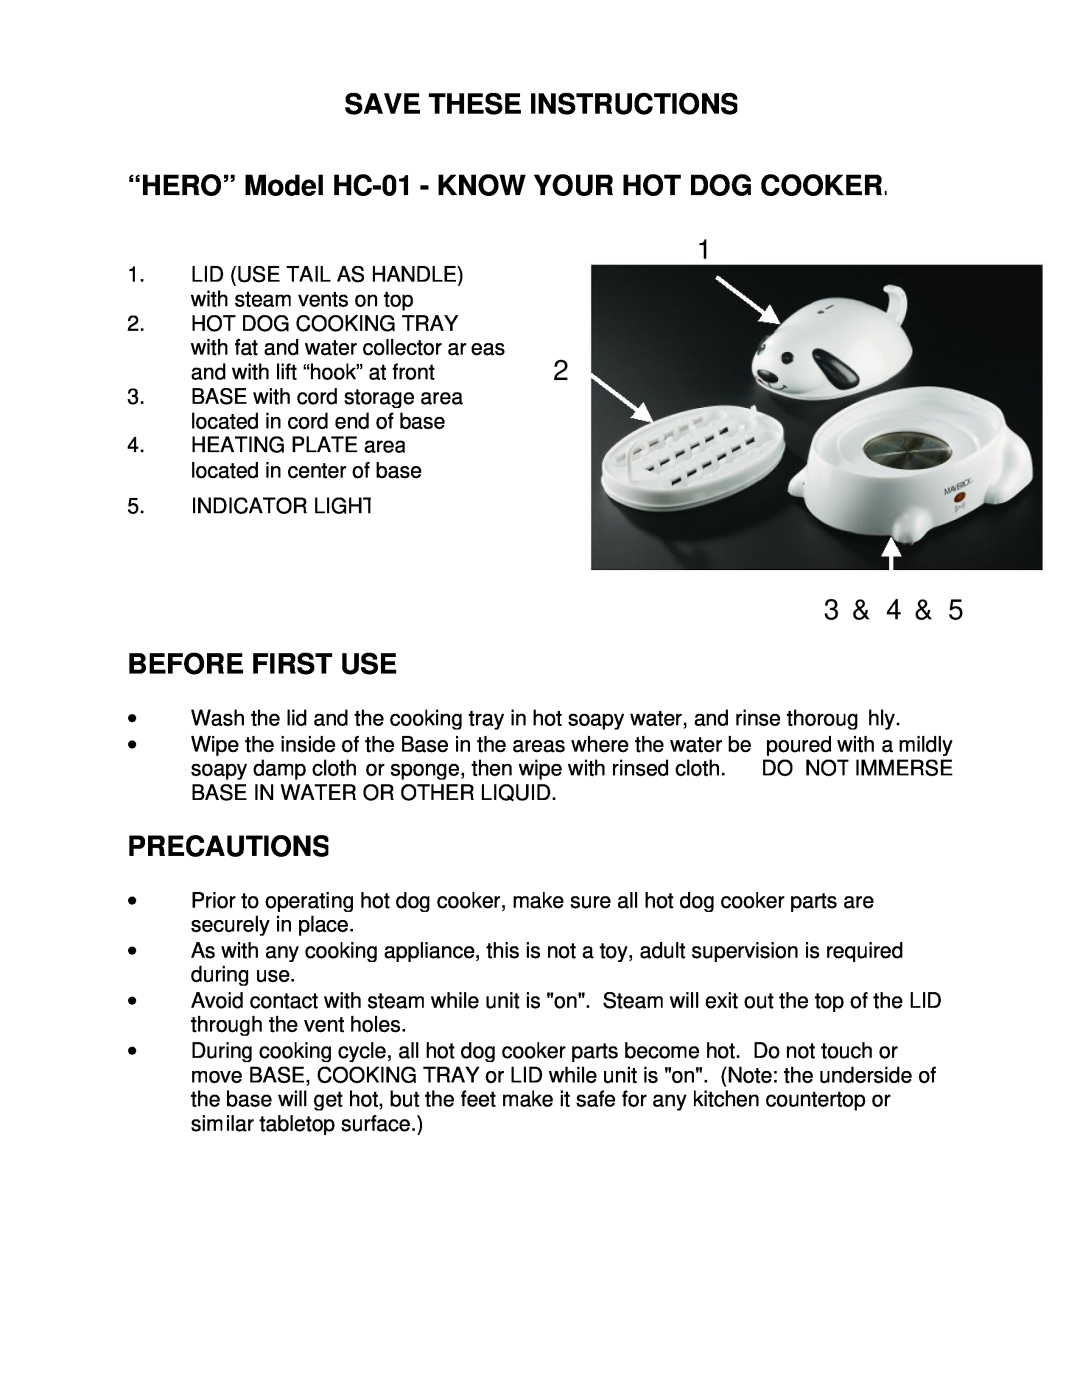 Maverick Ventures manual Save These Instructions, “HERO” Model HC-01- KNOW YOUR HOT DOG COOKER, 3 & 4 & BEFORE FIRST USE 